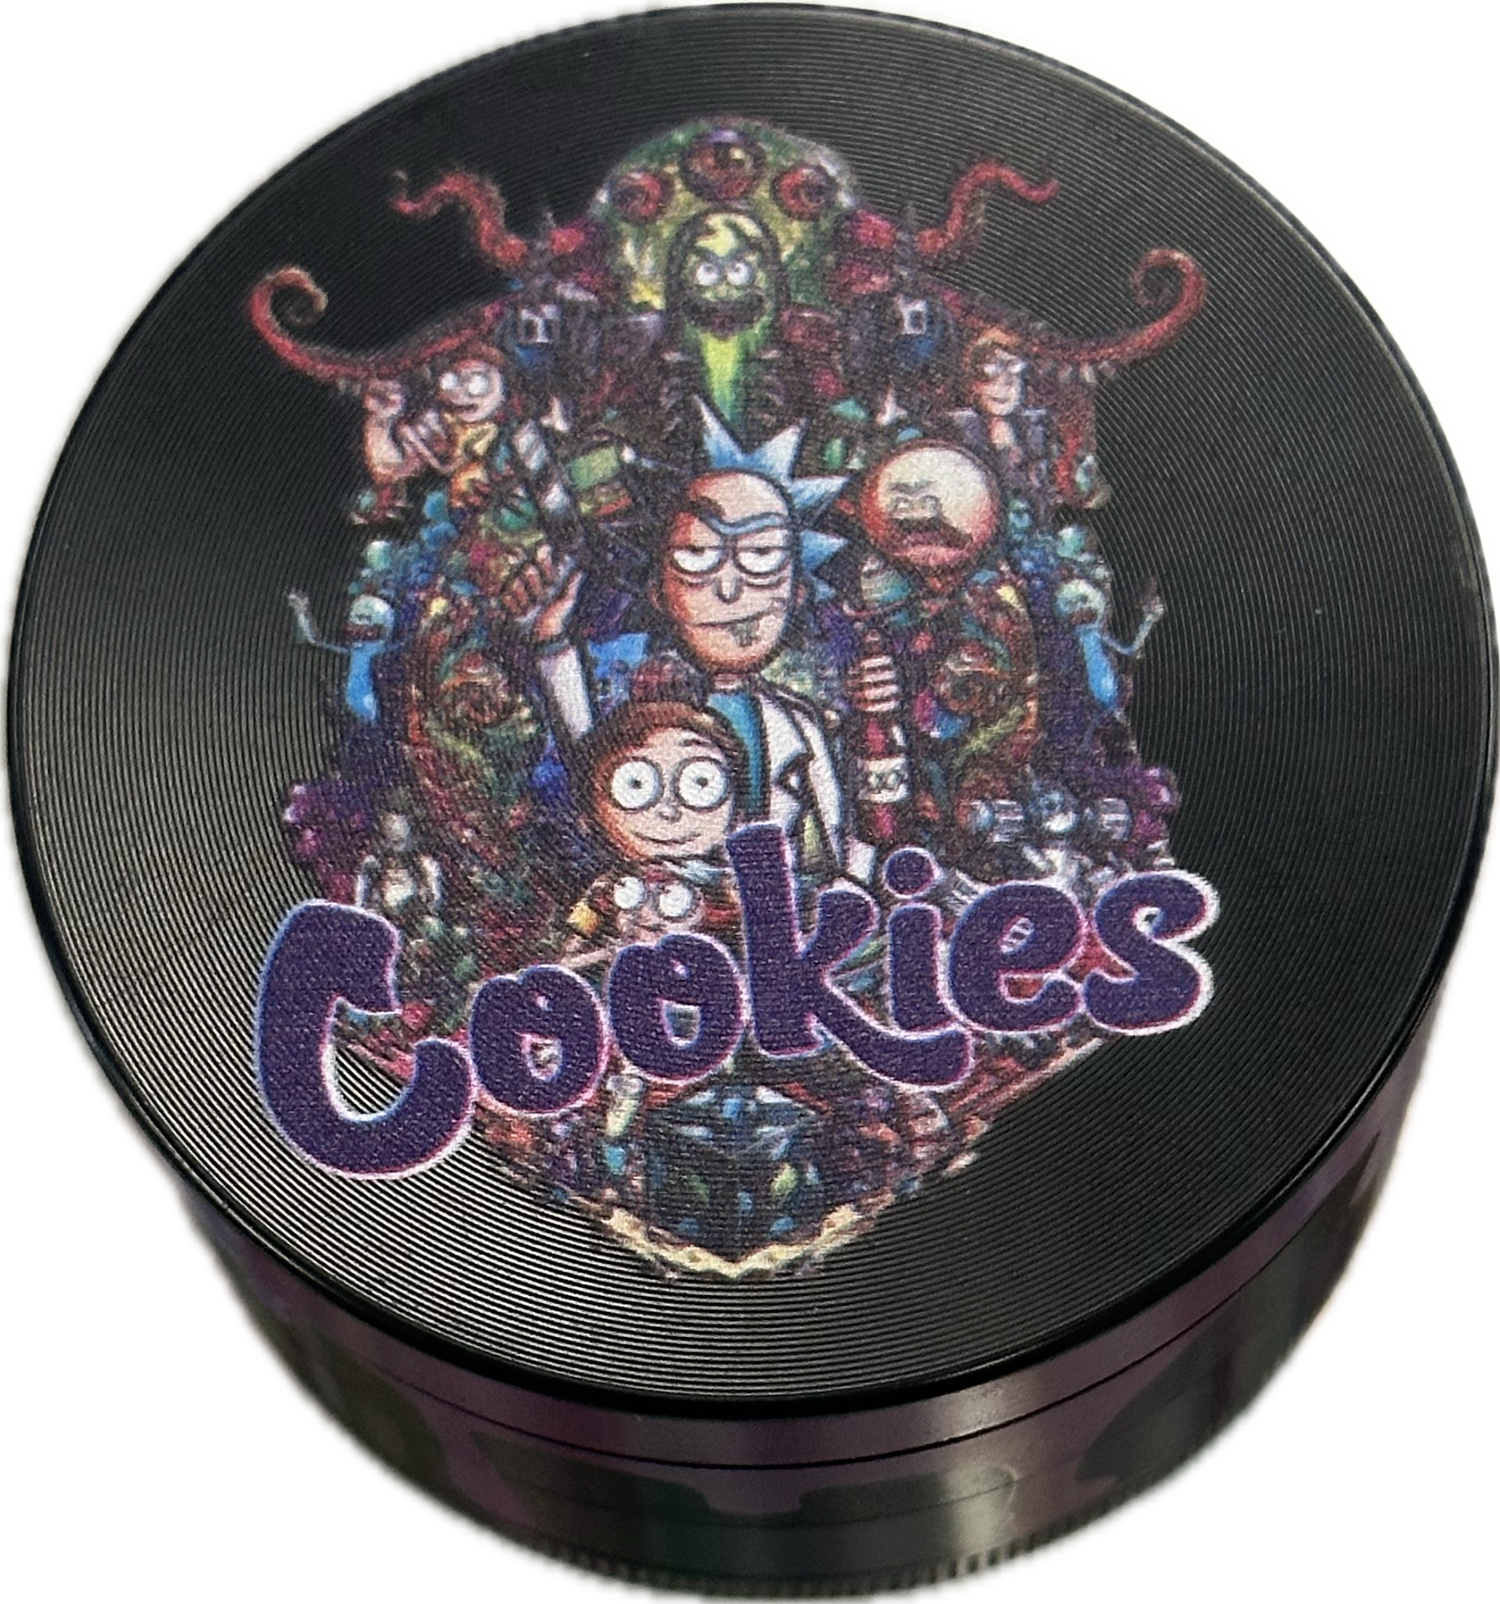 Rick and Morty X Cookies